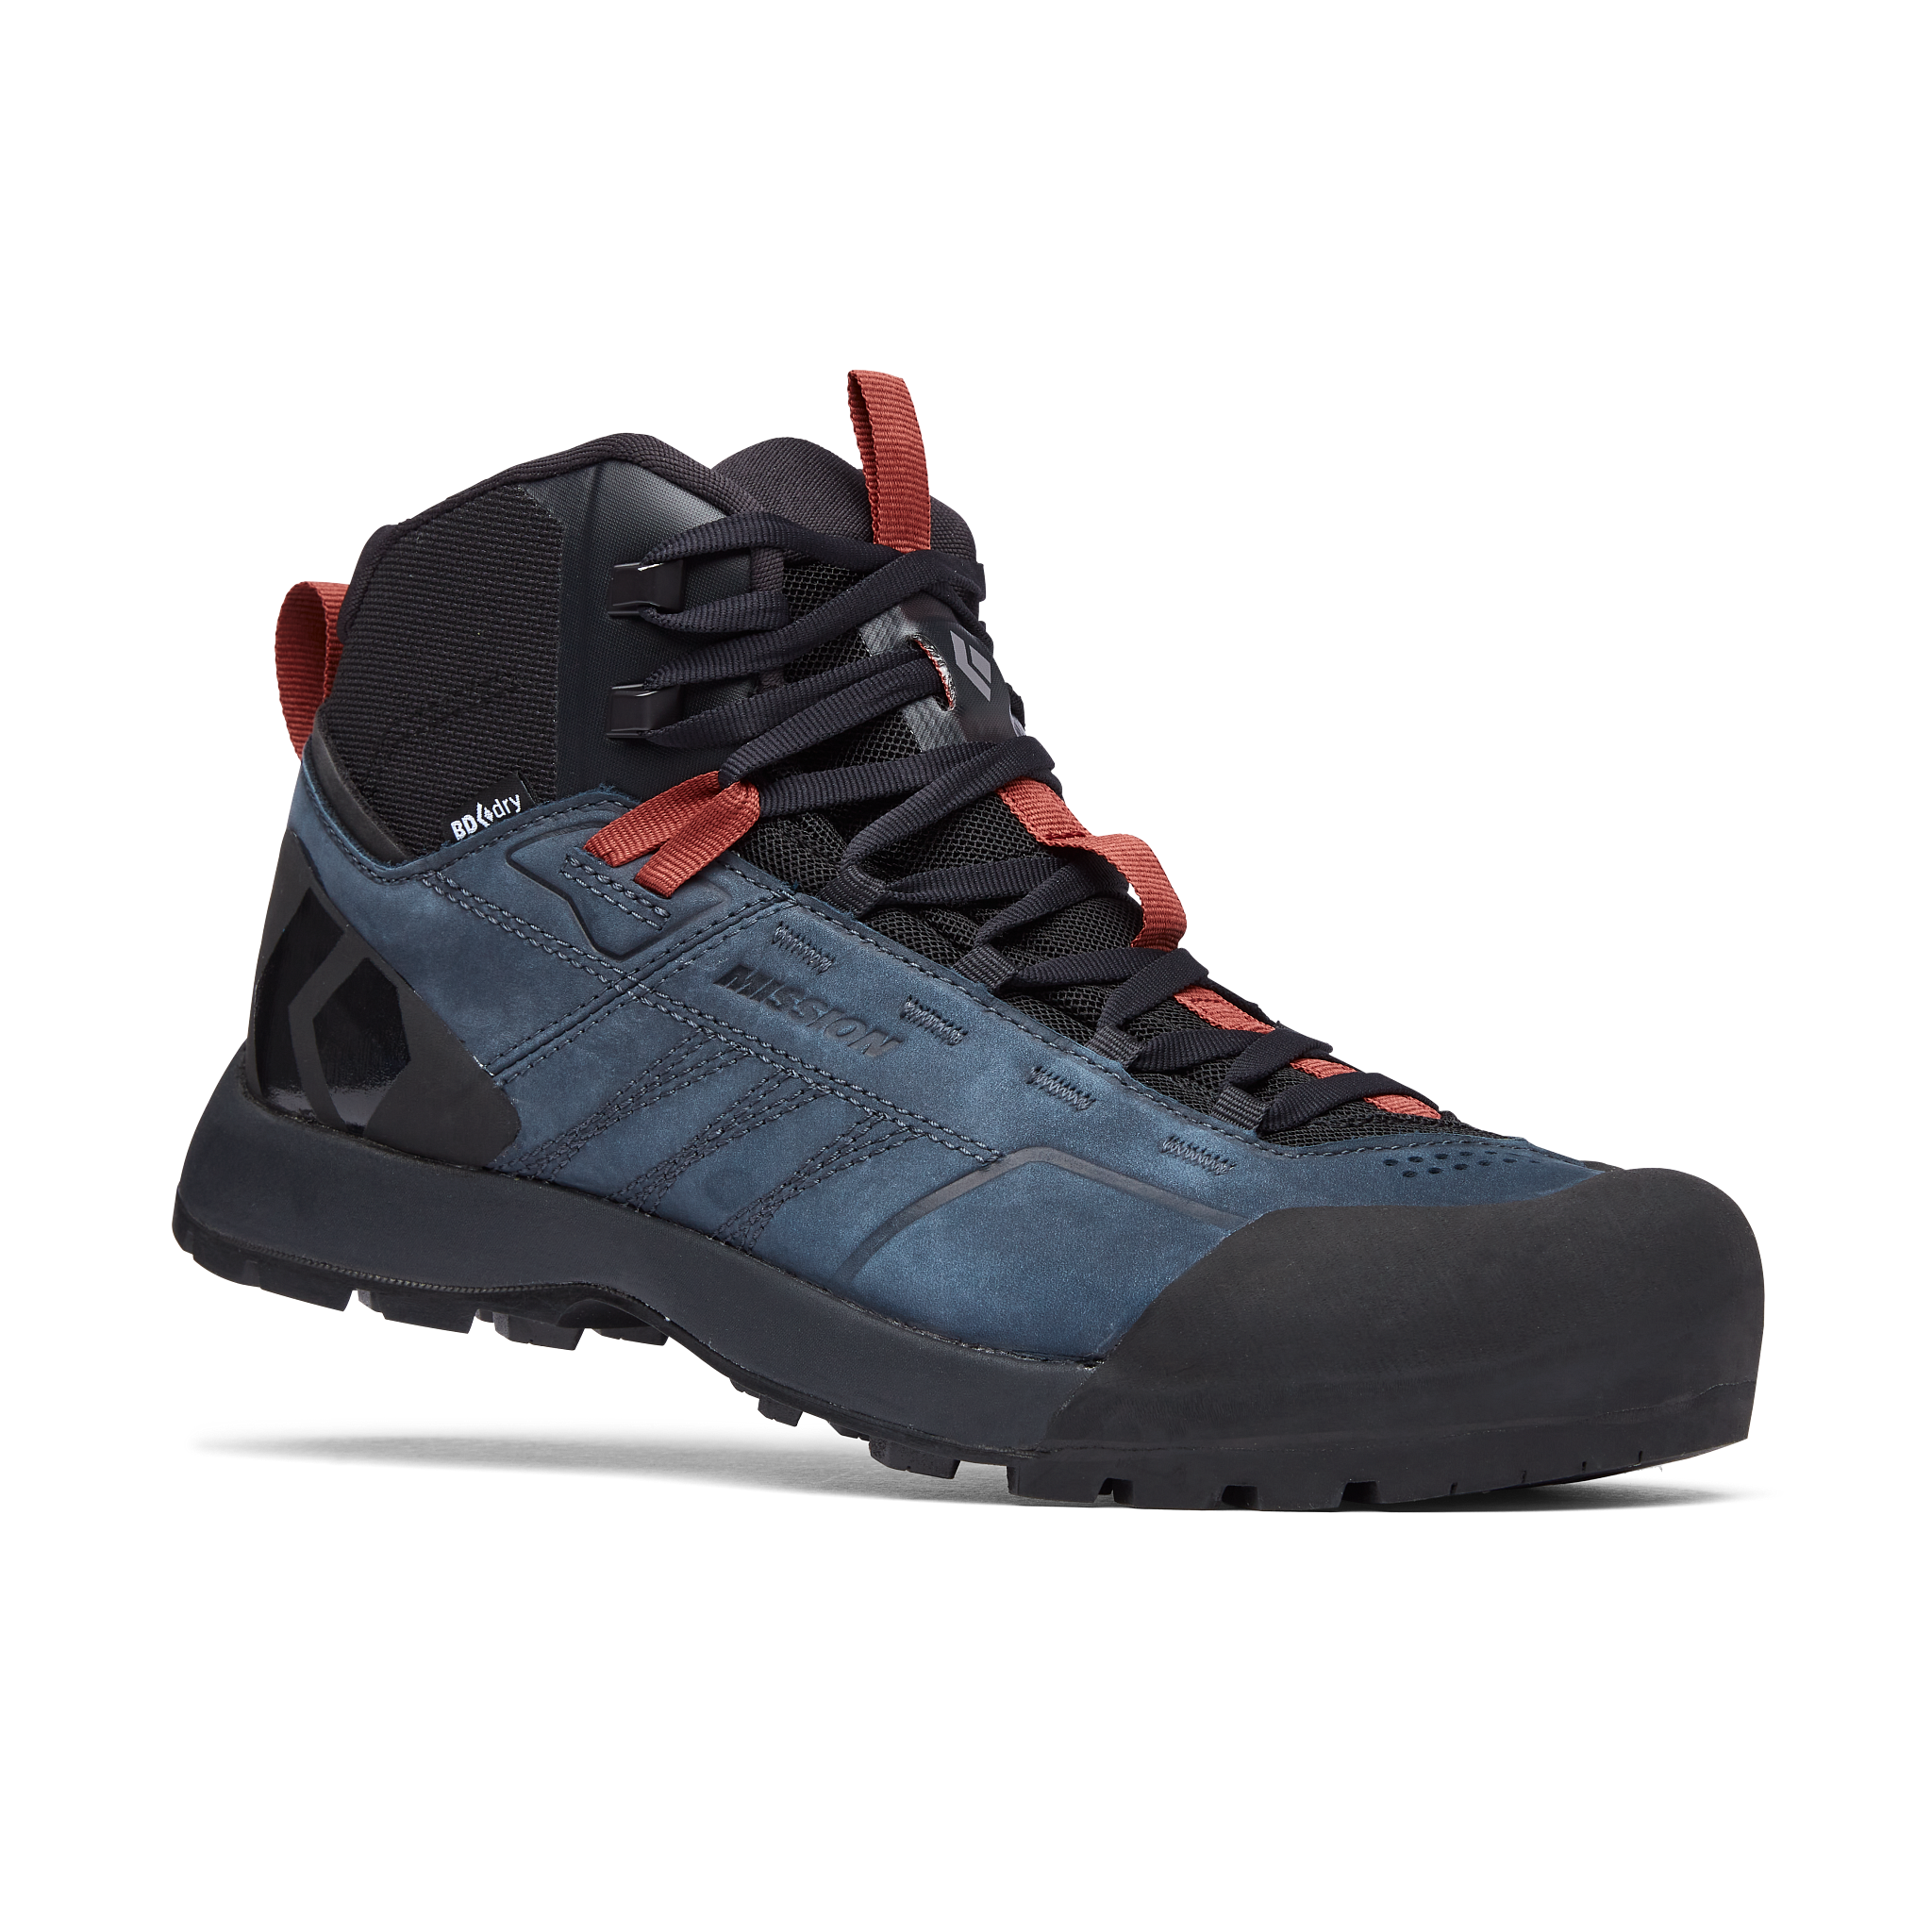 Black Diamond Equipment Men's Mission Leather Mid Waterproof Approach Shoes 2nds US 7 Eclipse/Red Rock